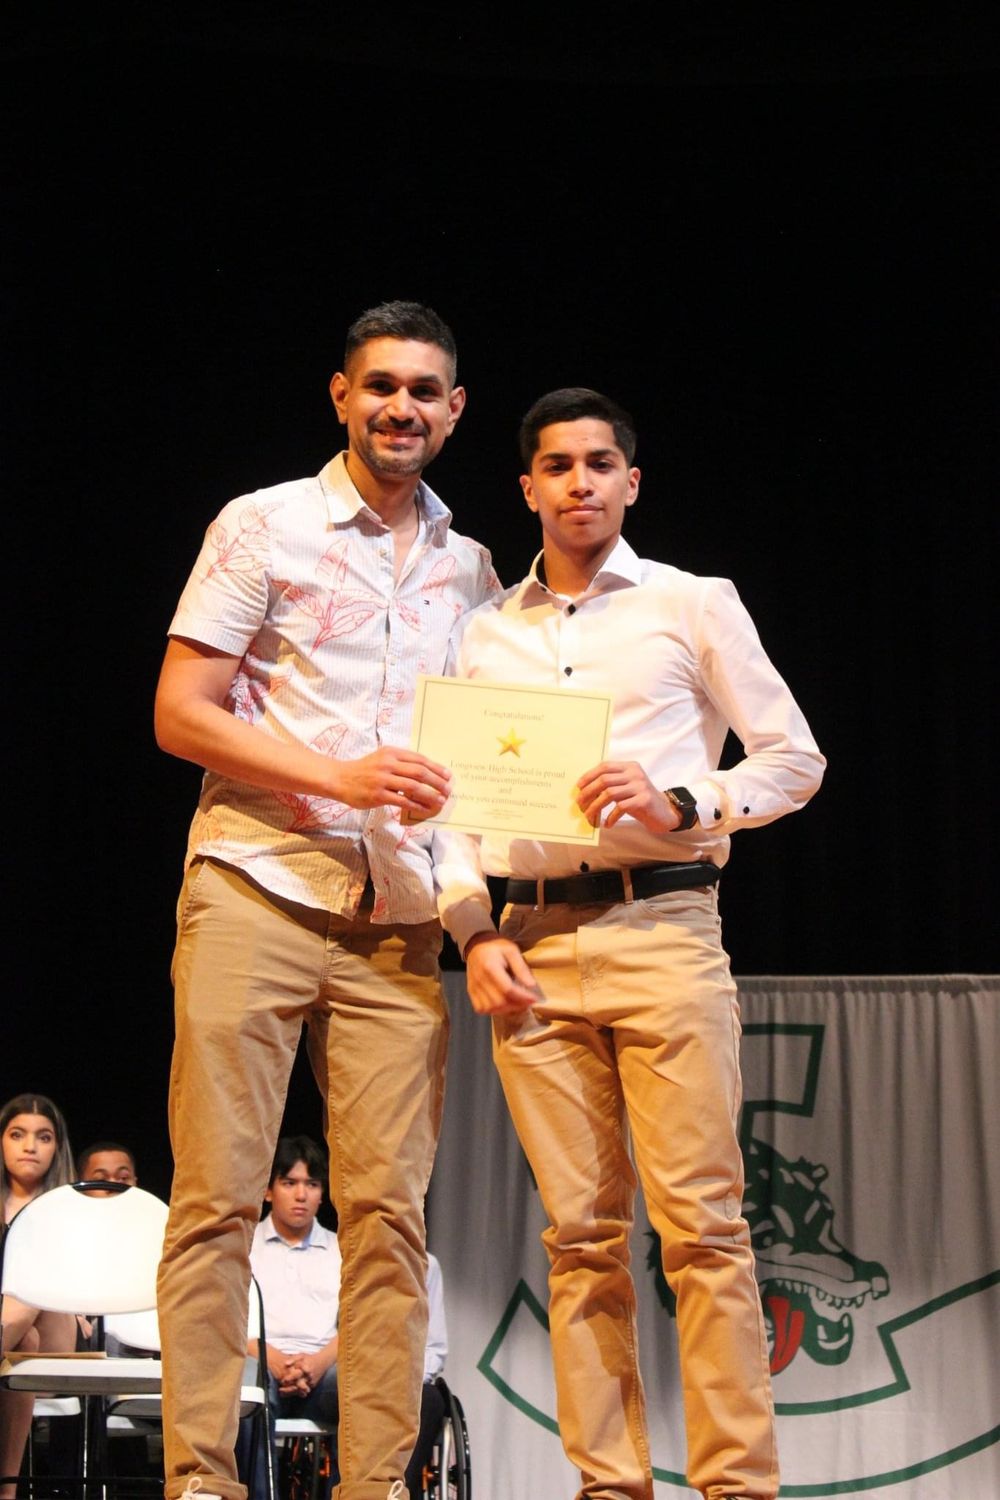 Rojas stands with student holding a scholarship certificate.